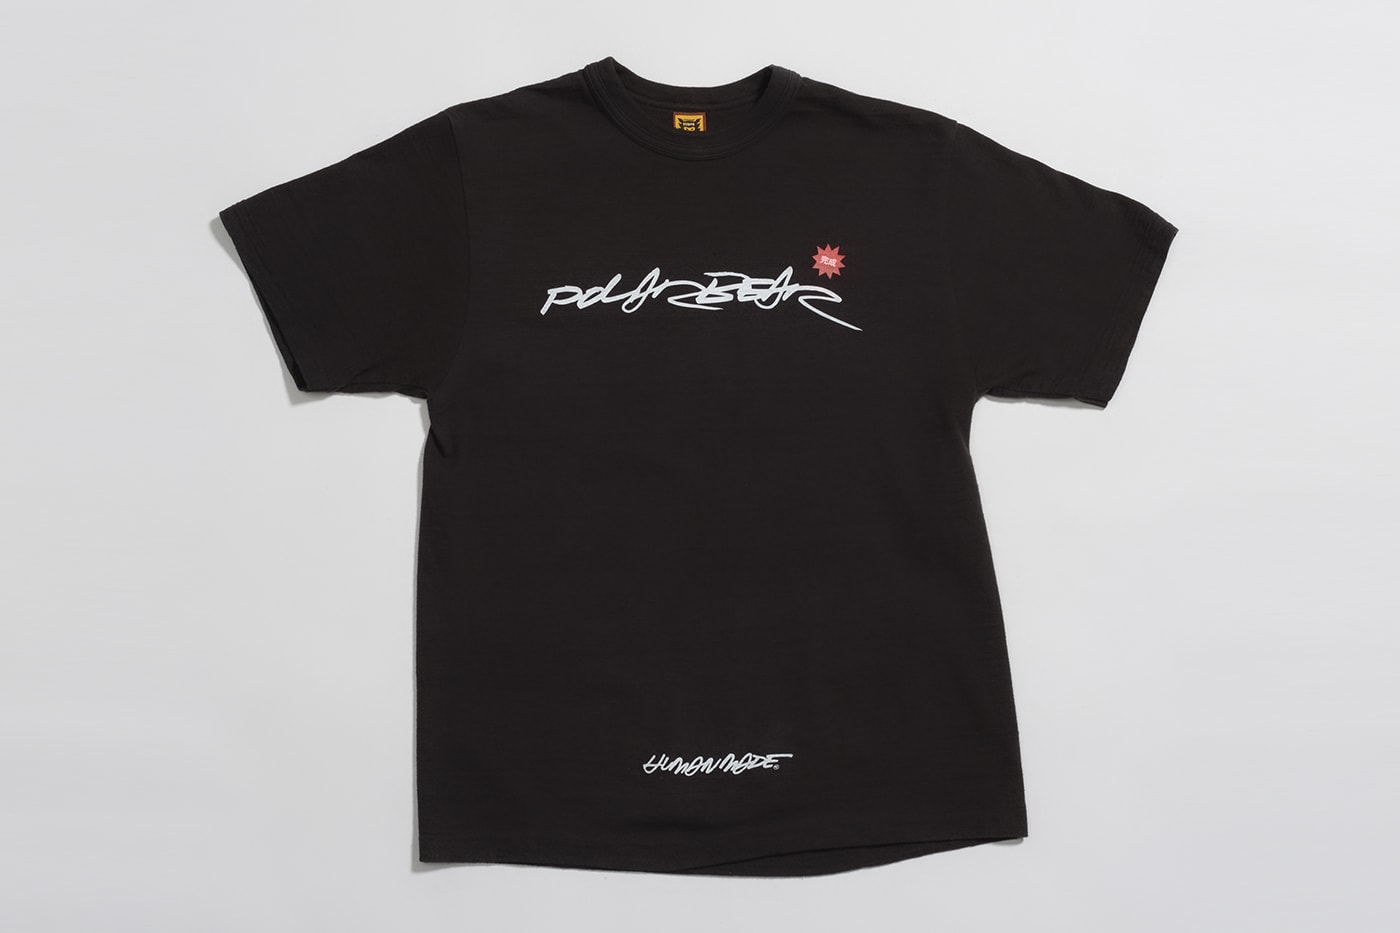 Futura Laboratories HUMAN MADE OALLERY Exclusive T-Shirt Capsule Release Info Date Buy Black White